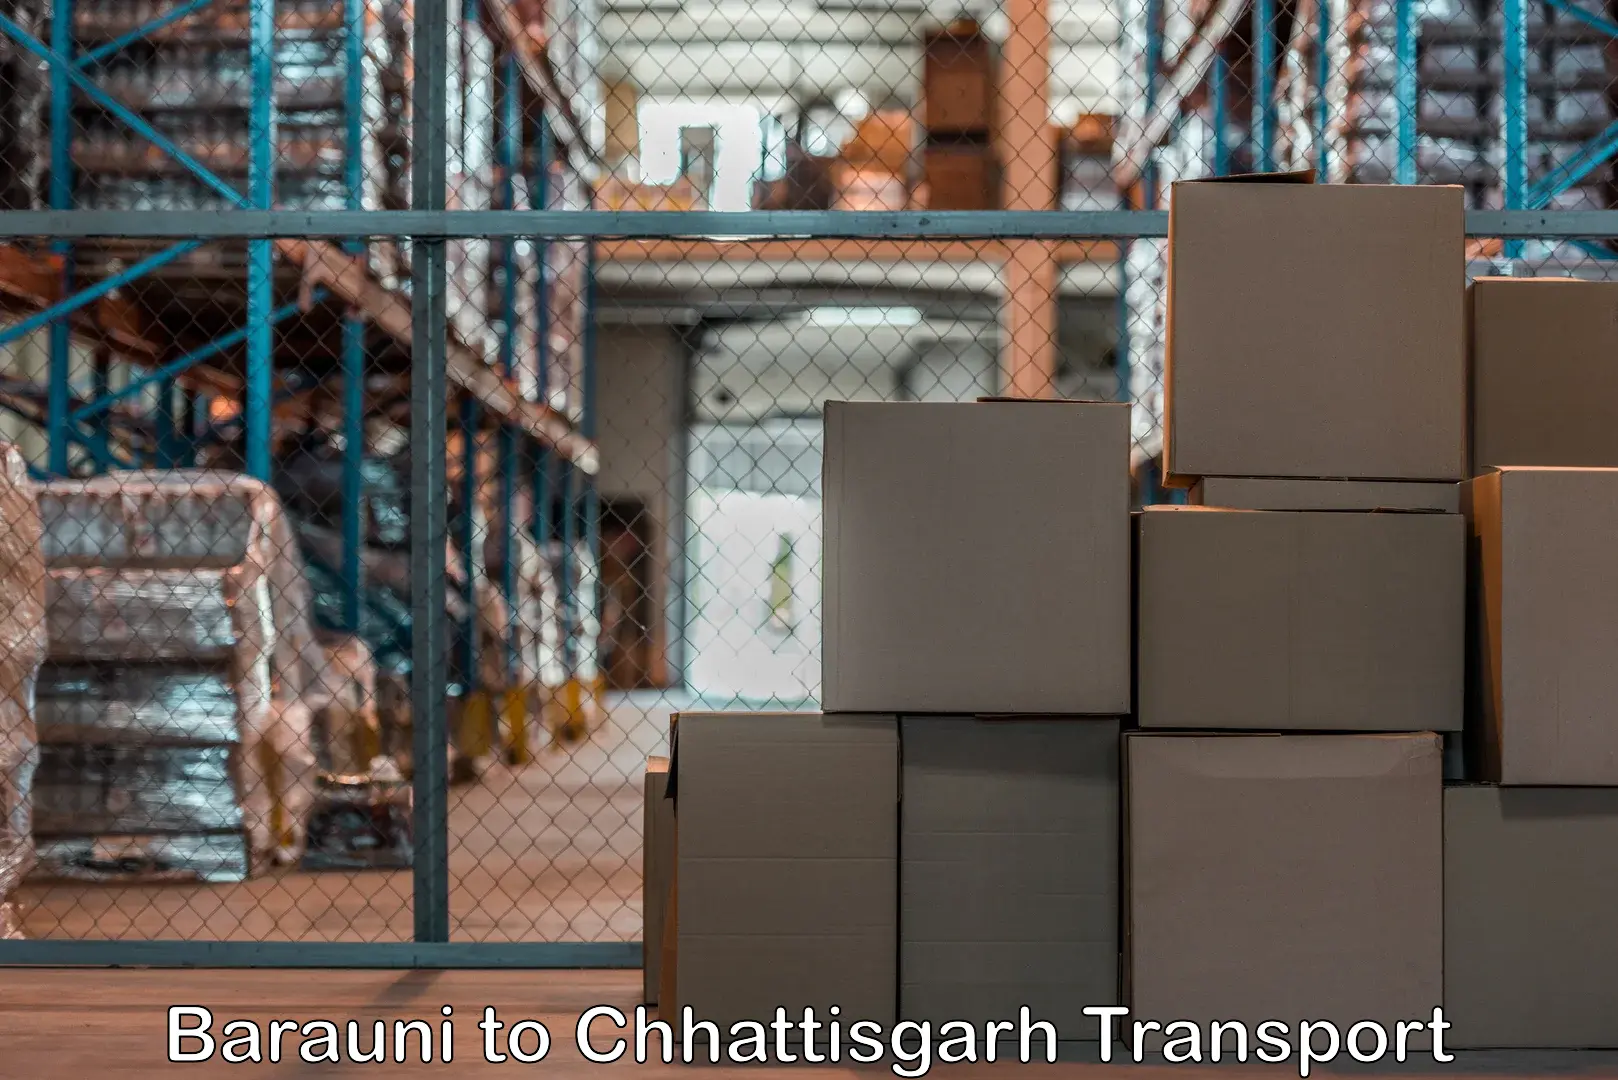 Daily parcel service transport Barauni to Raigarh